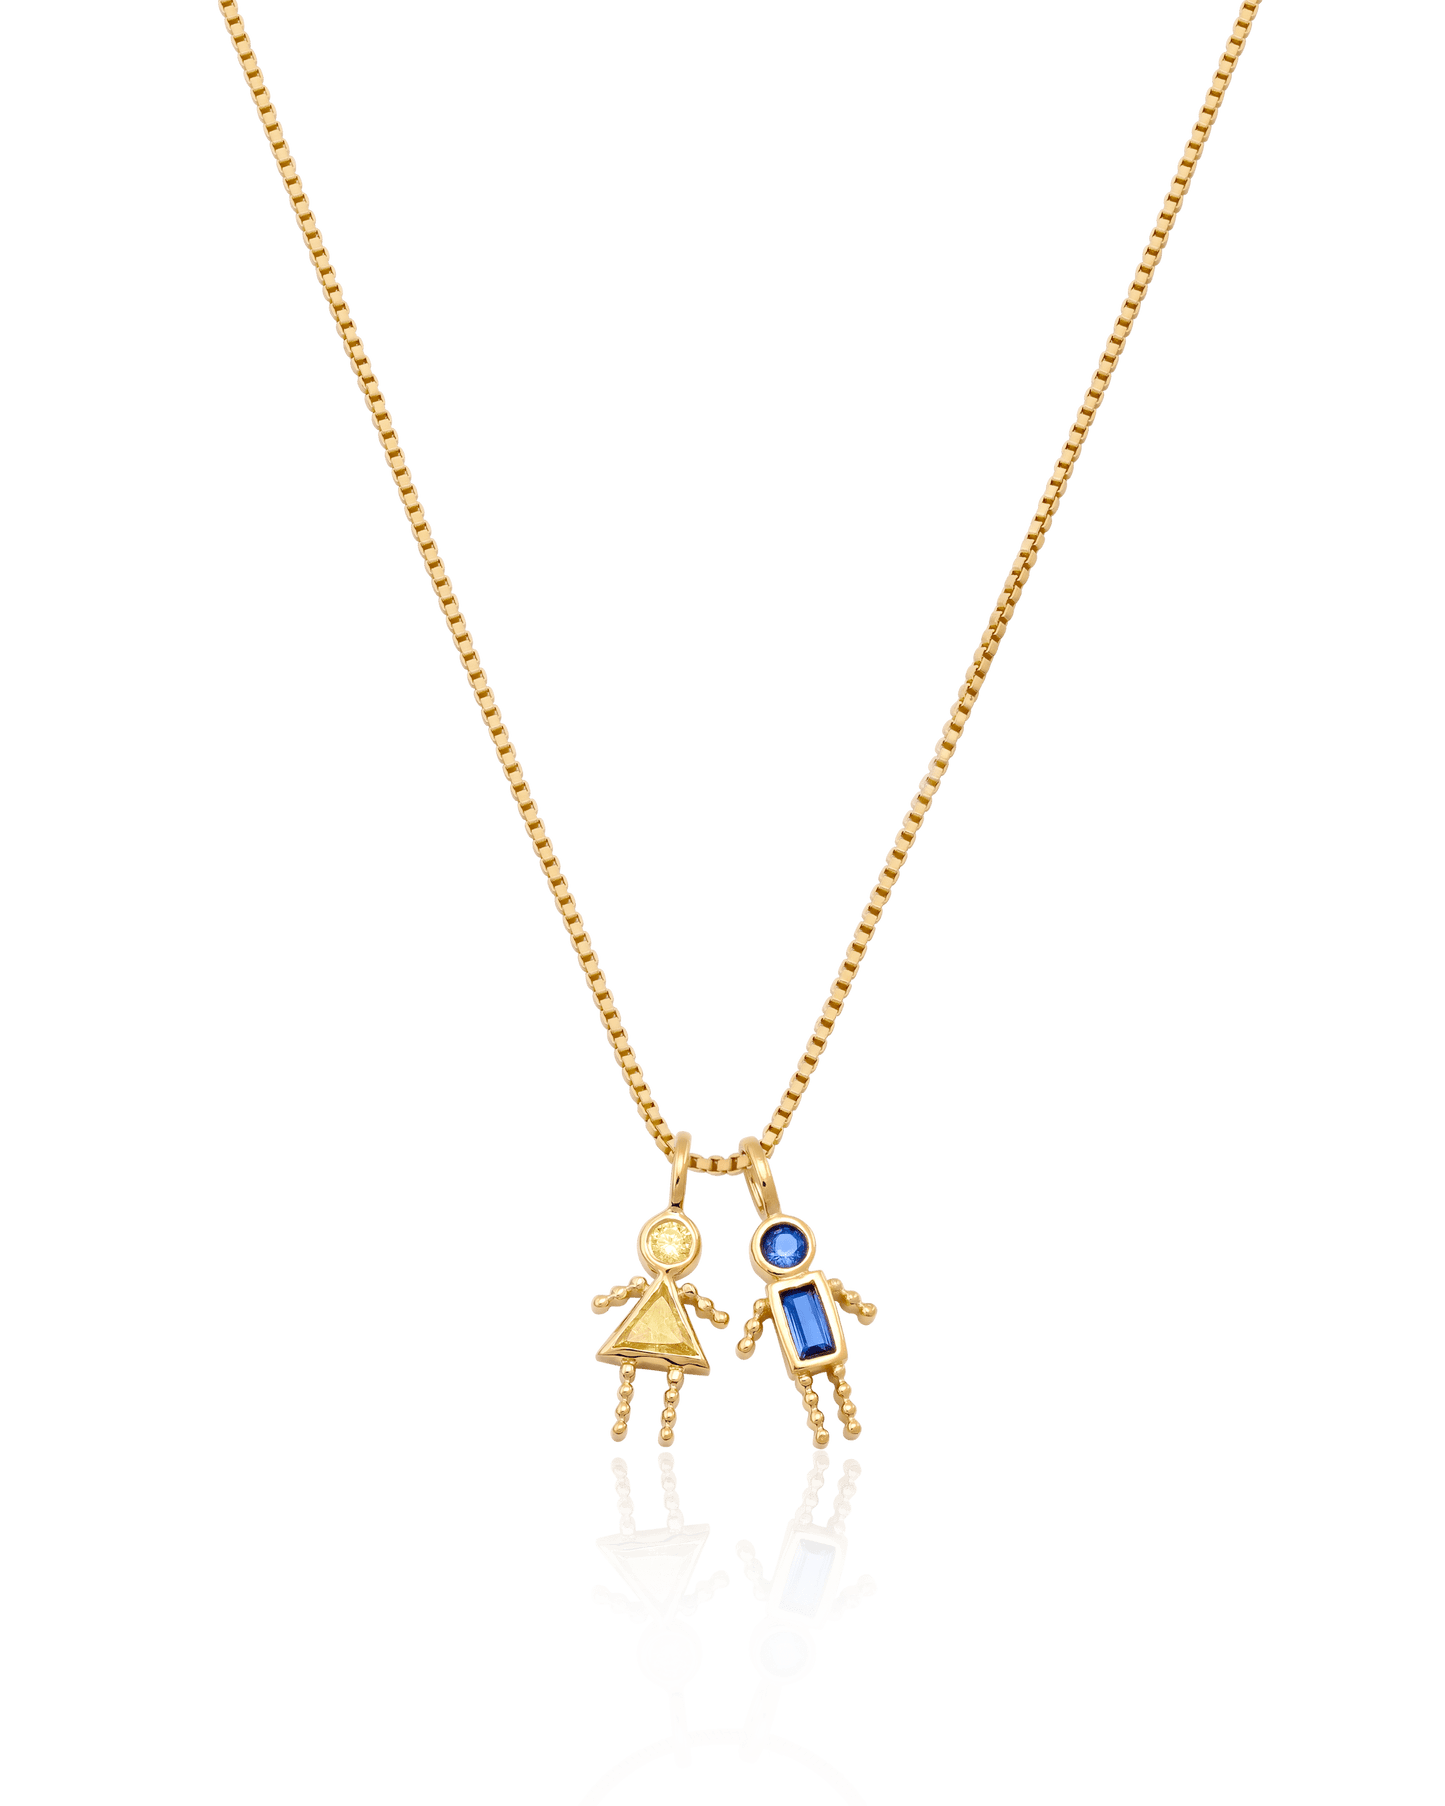 Mini Me Birthstone Necklace - 18K Gold Vermeil Necklaces magal-dev 1 Small - 16" 